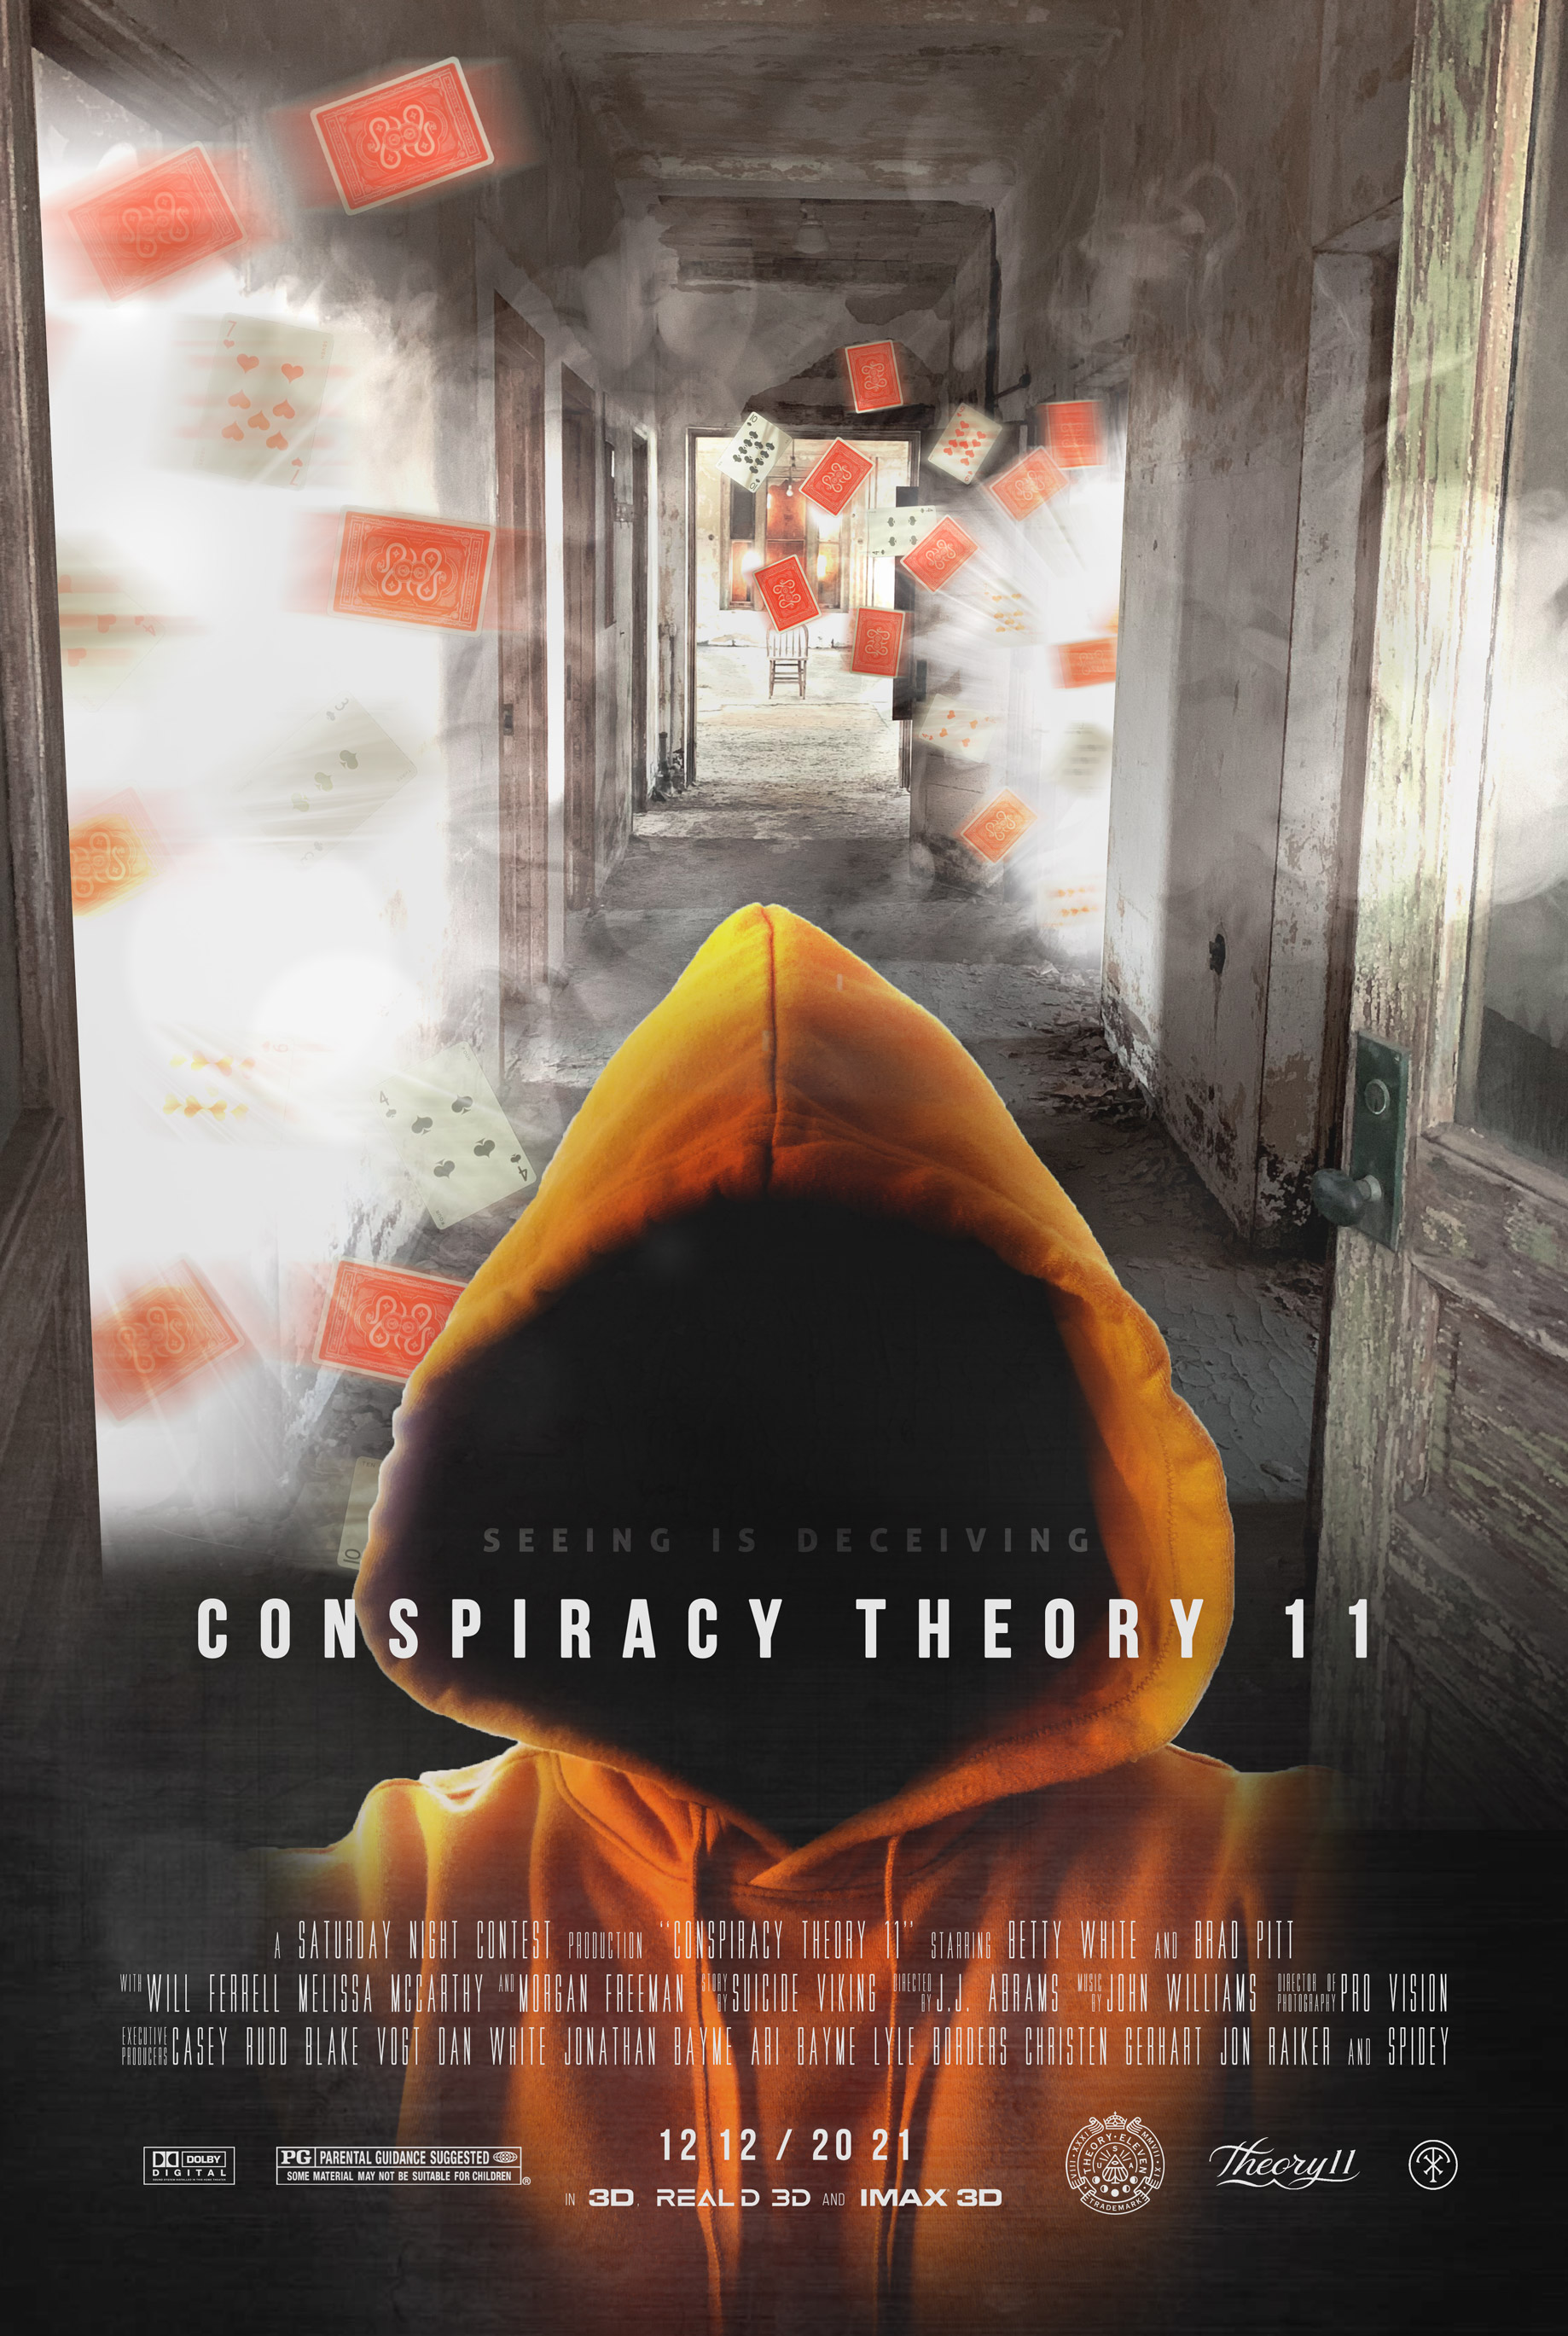 Conspiracy Theory 11 Poster.jpg